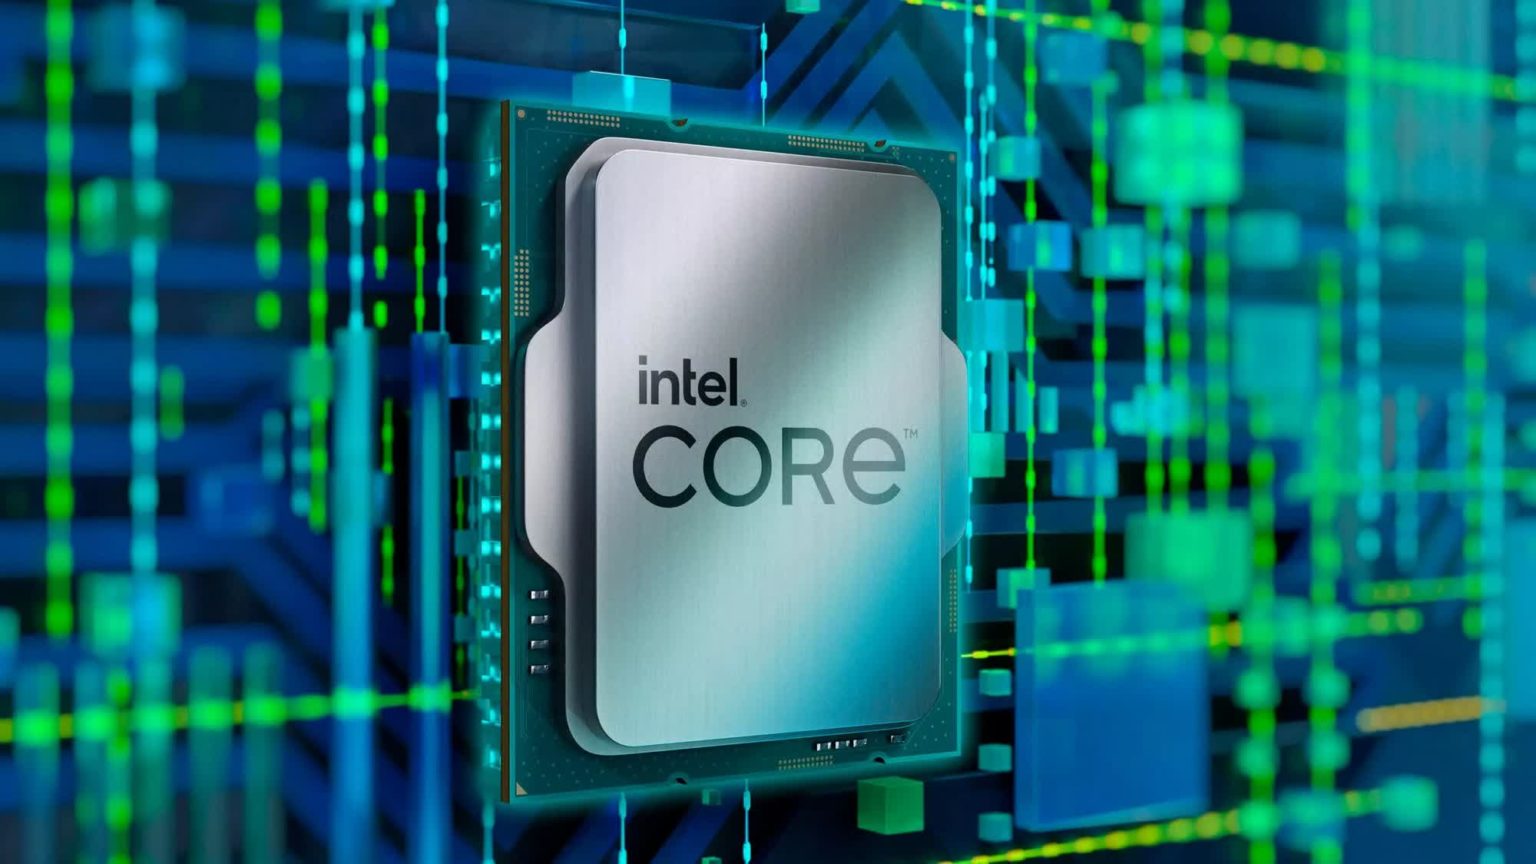 Intel Arrow Lake-S desktop processors to ditch LP-E cores and hyper-threading, feature 4 Xe-core iGPU